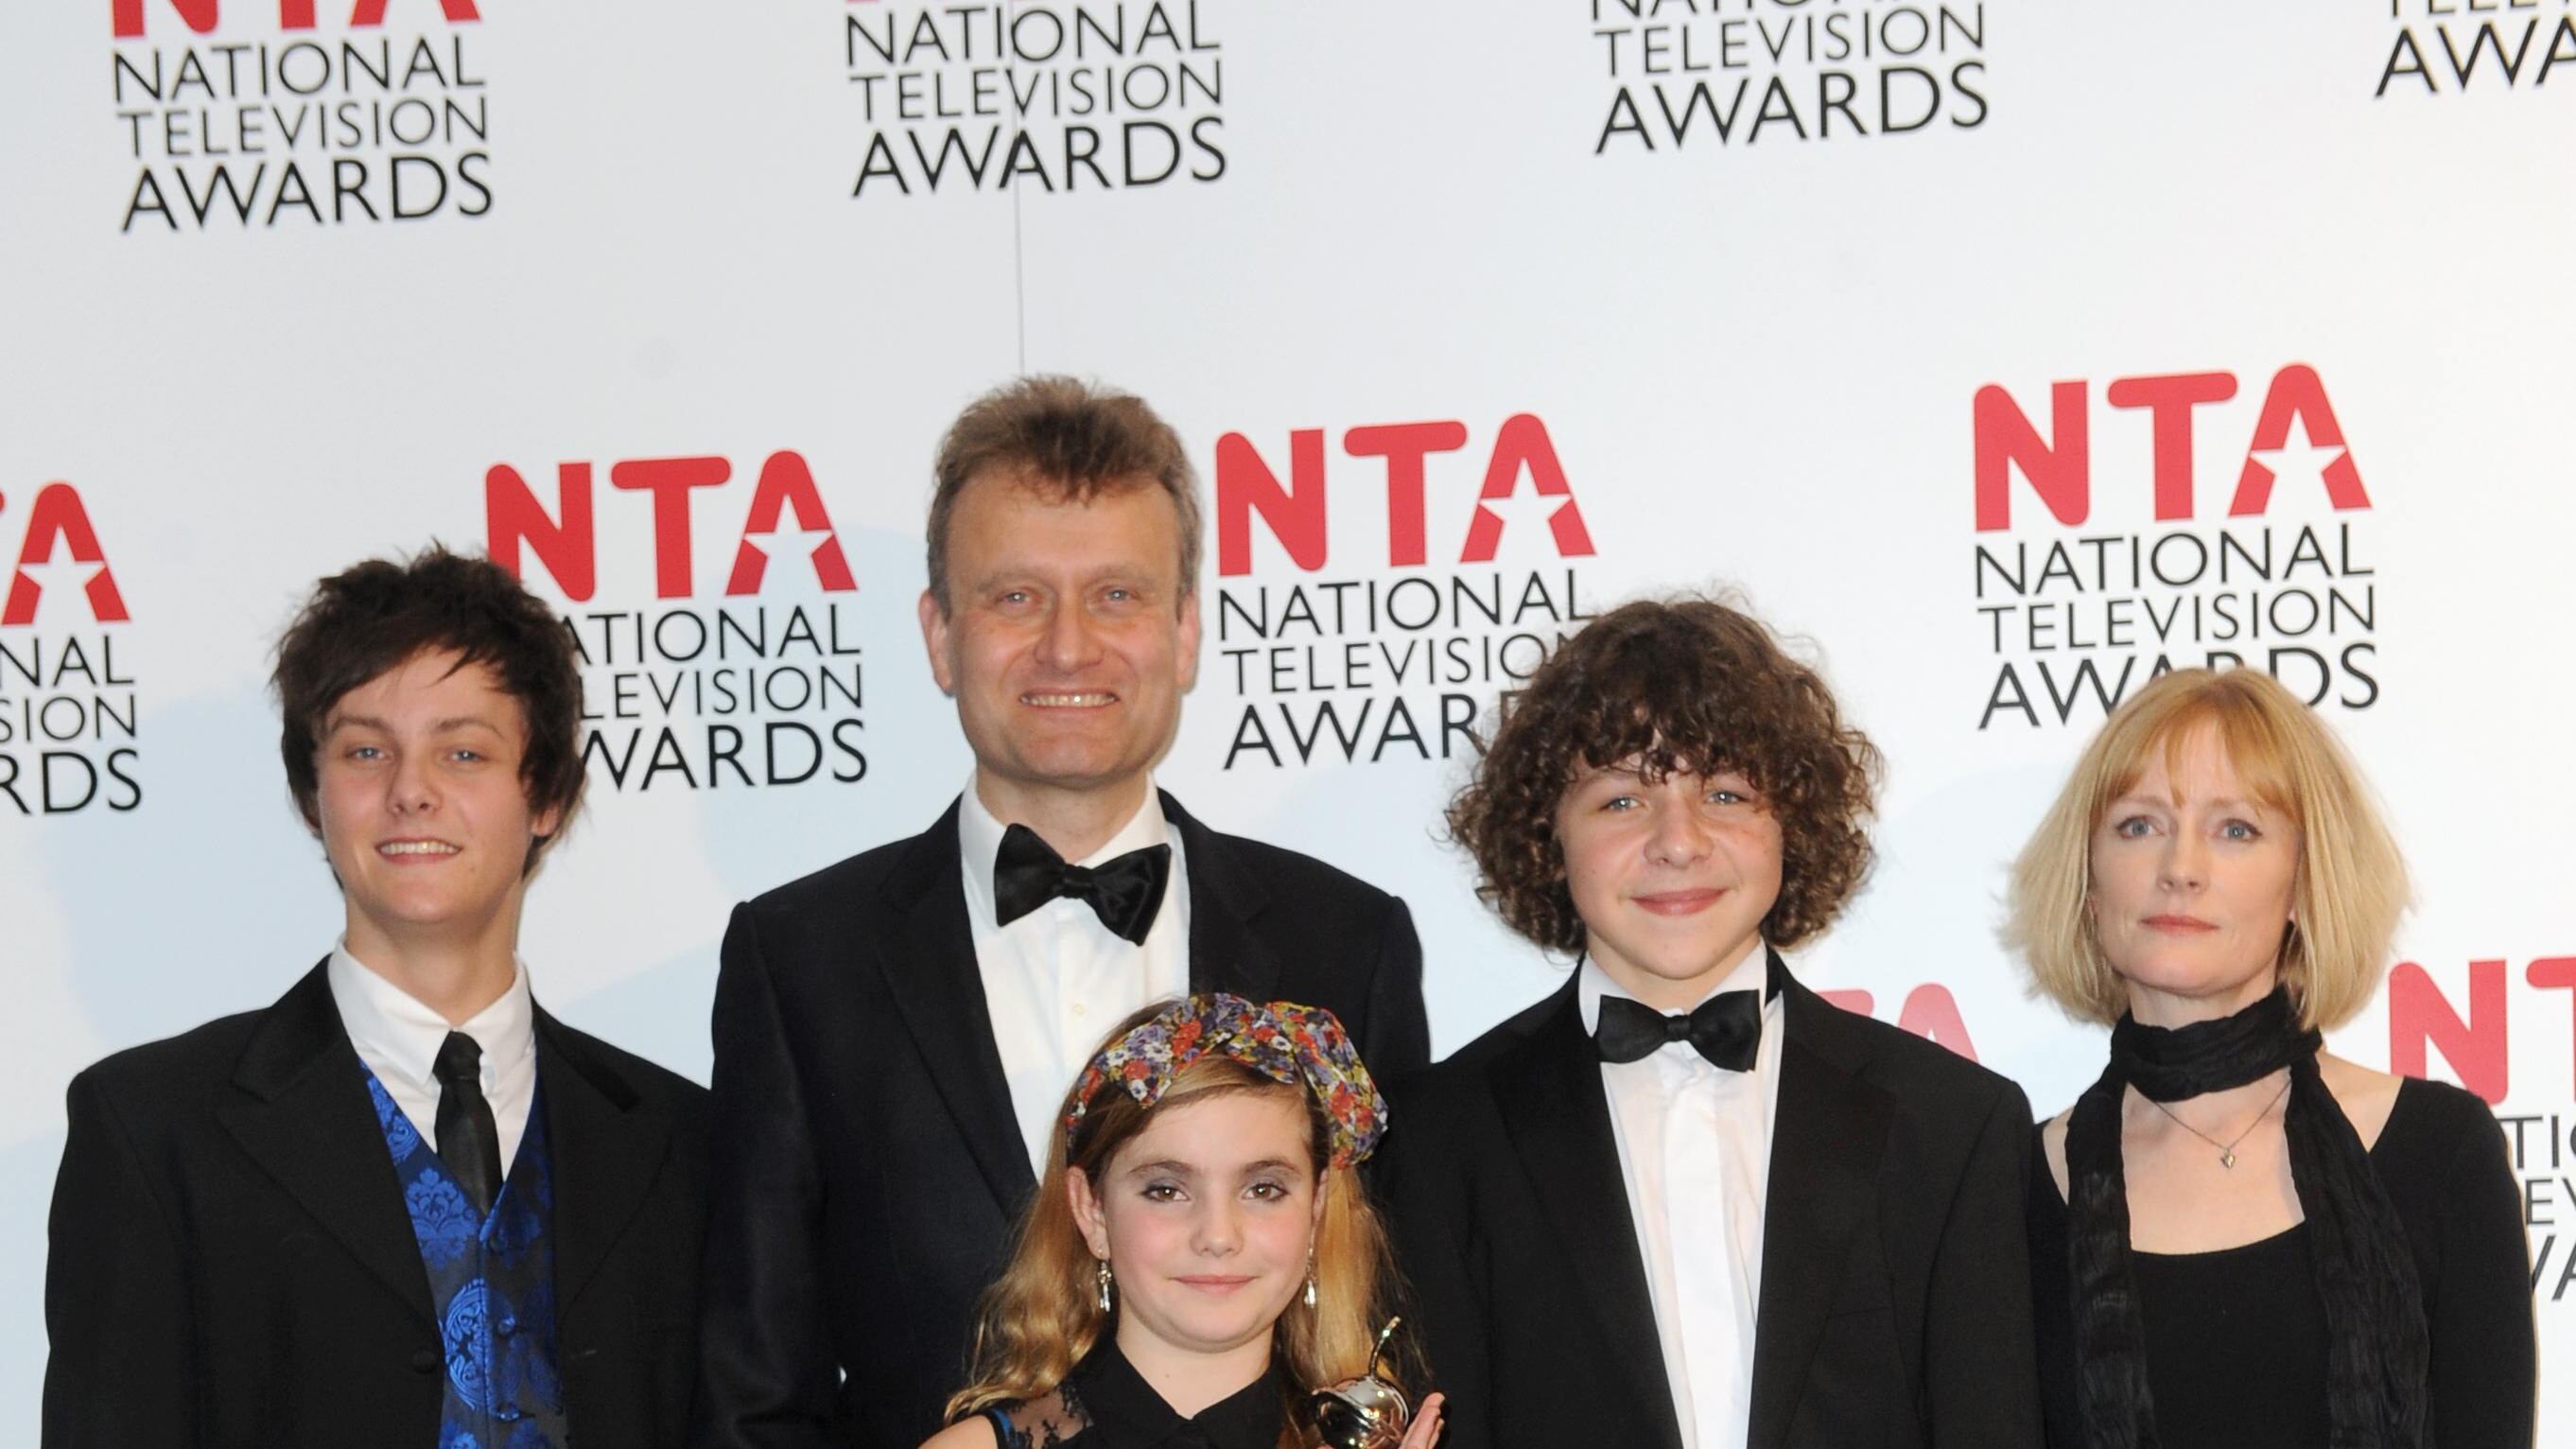 The cast of Outnumbered Tyger Drew-Honey, Hugh Dennis, Ramona Marquez, Daniel Roche and Claire Skinner